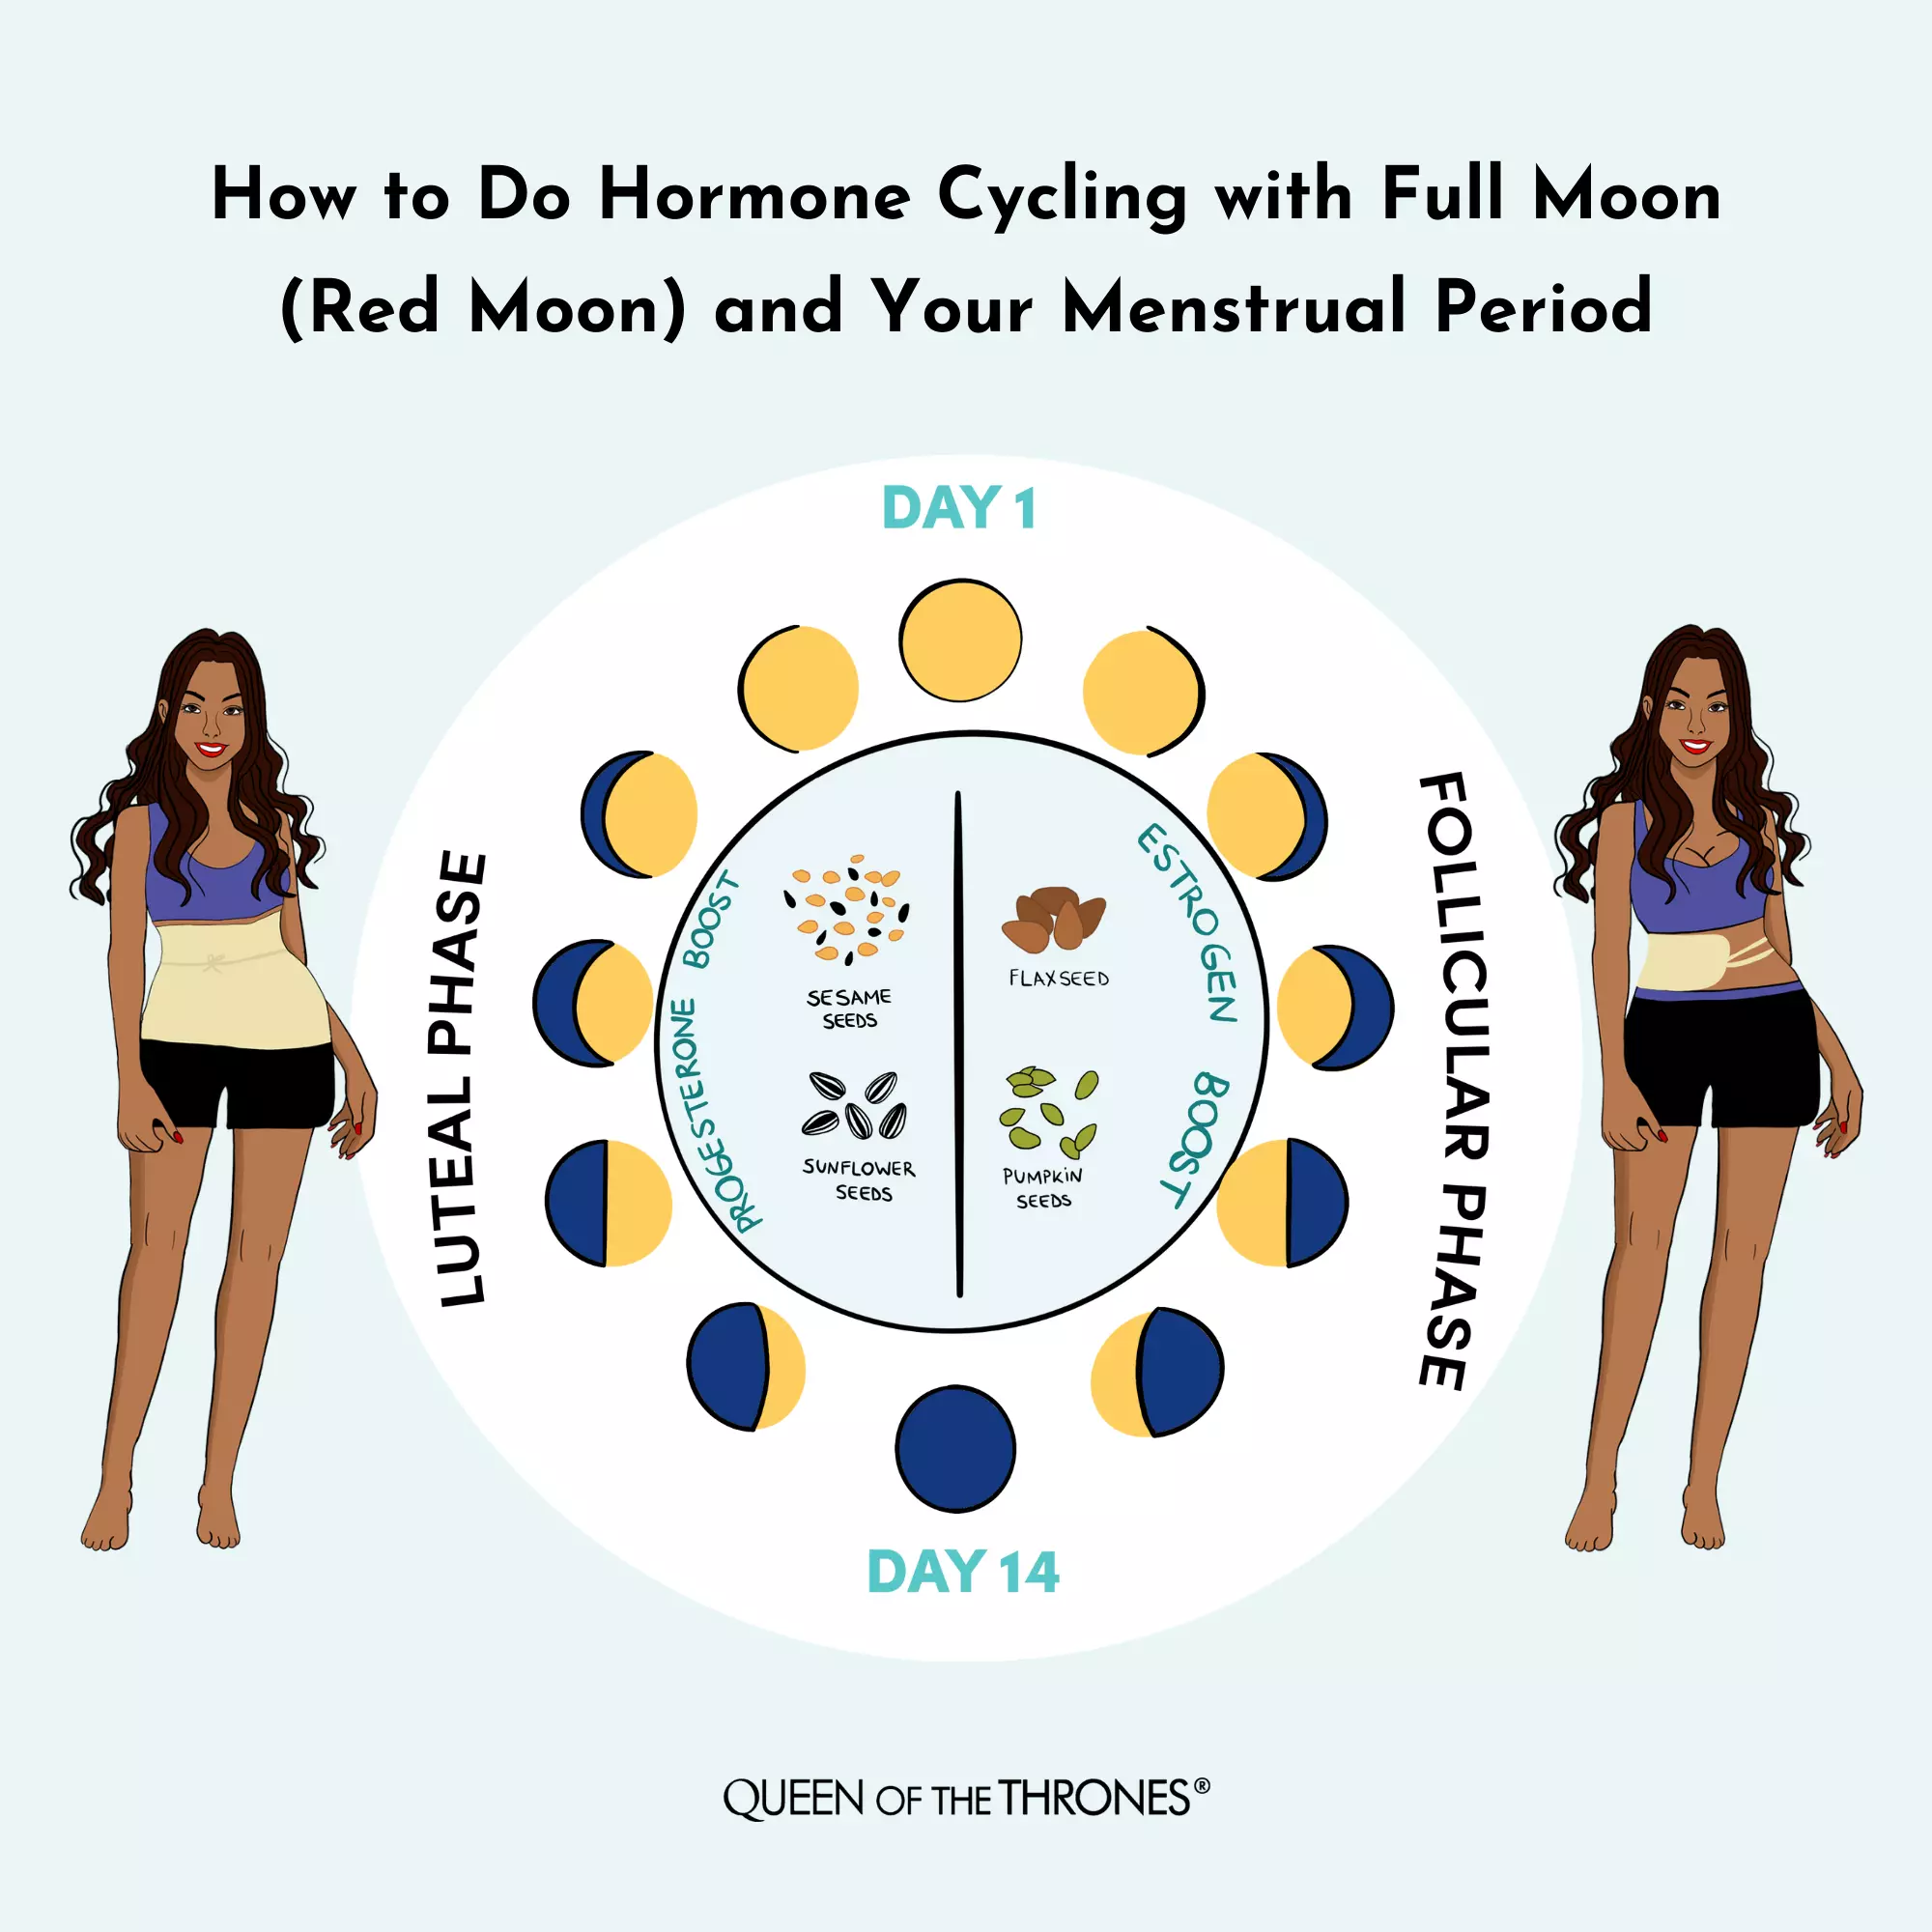 How to do Hormone Cycling with Full Moon and your Menstruation Period by Queen of the Thrones